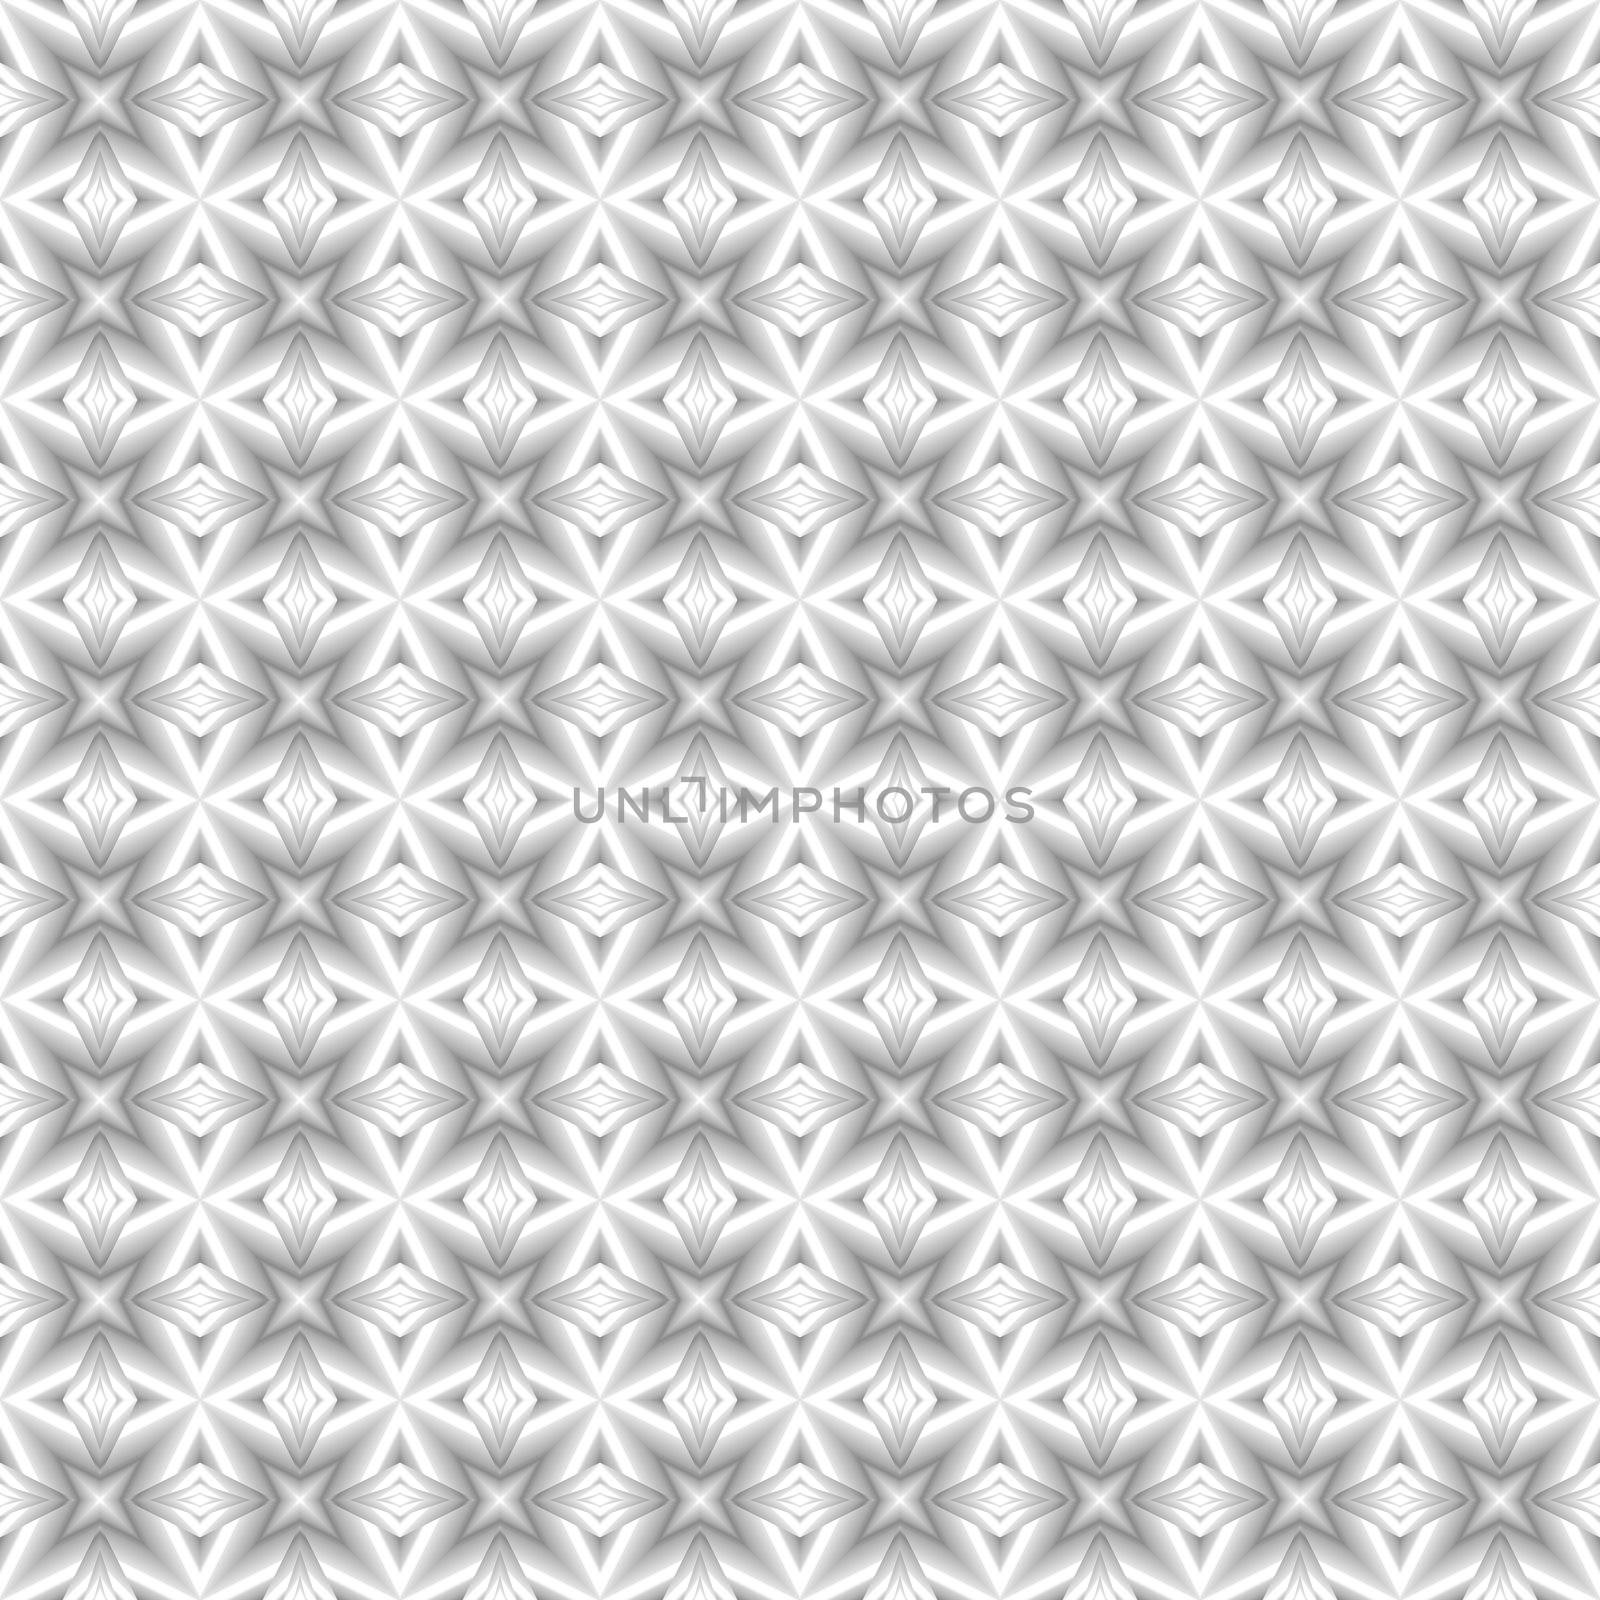 seamless tilable black and white square background texture with old-fashioned look and in high key